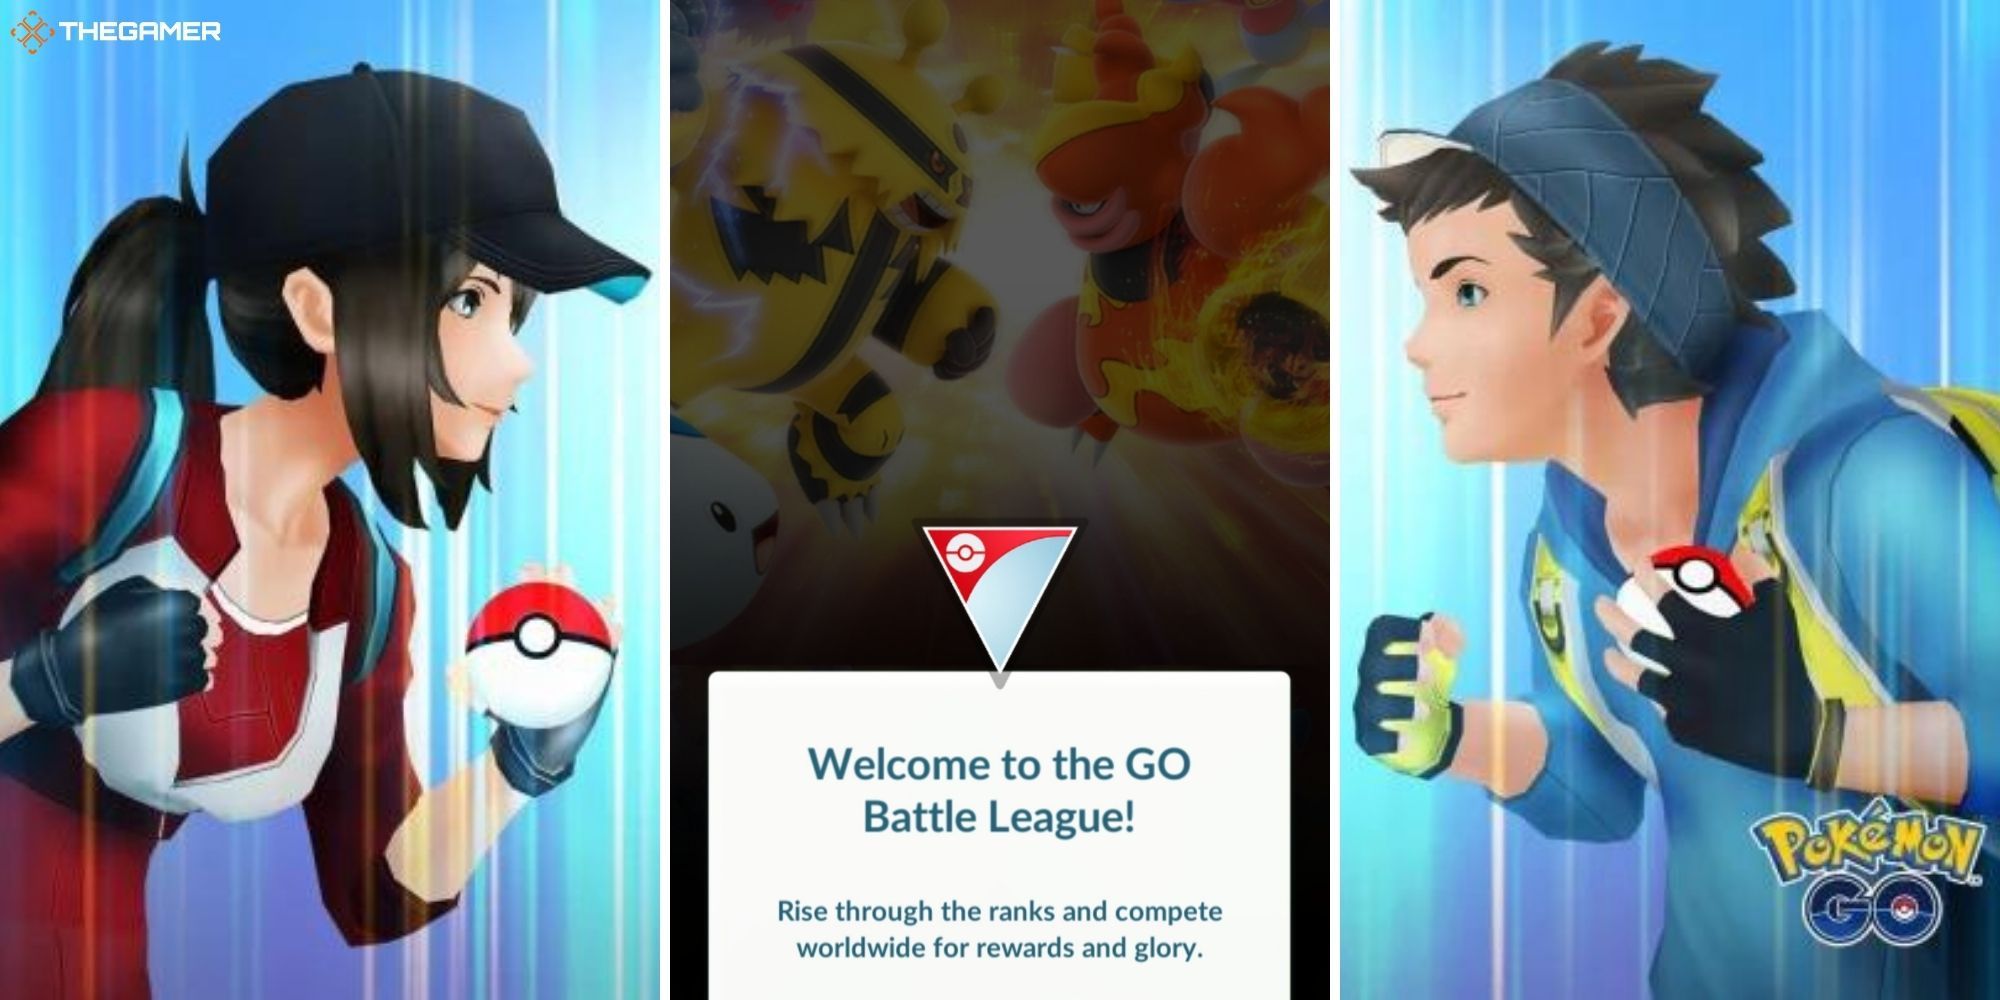 Pokemon GO Promo art on the right and left of players ready for a fight, welcome to the battle league message in centre